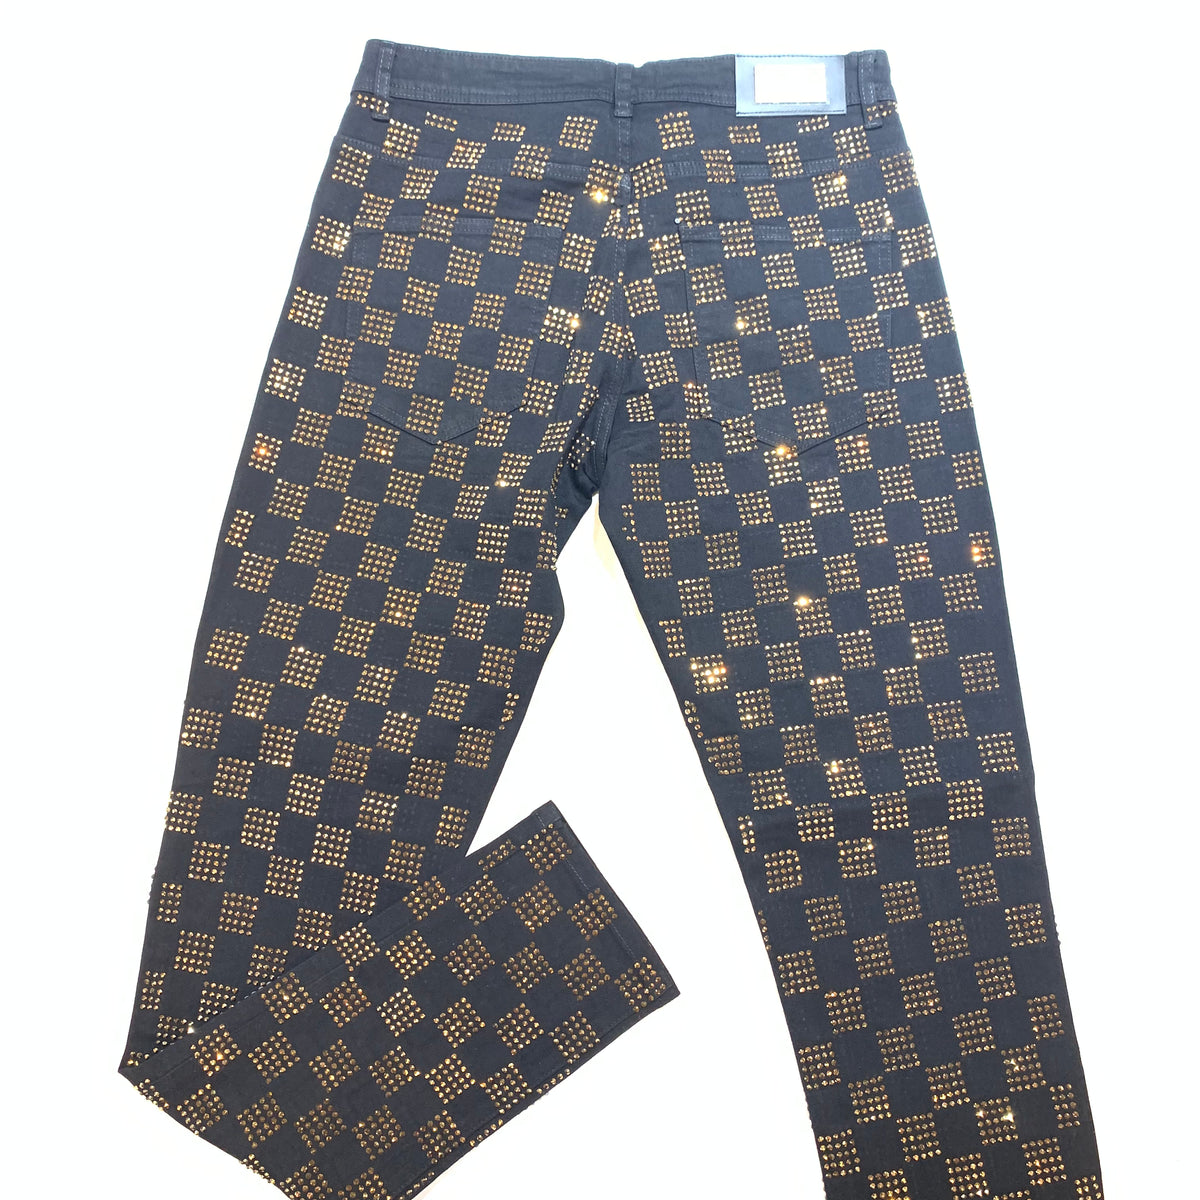 Barocco Black Gold Full Crystal Pants - Dudes Boutique